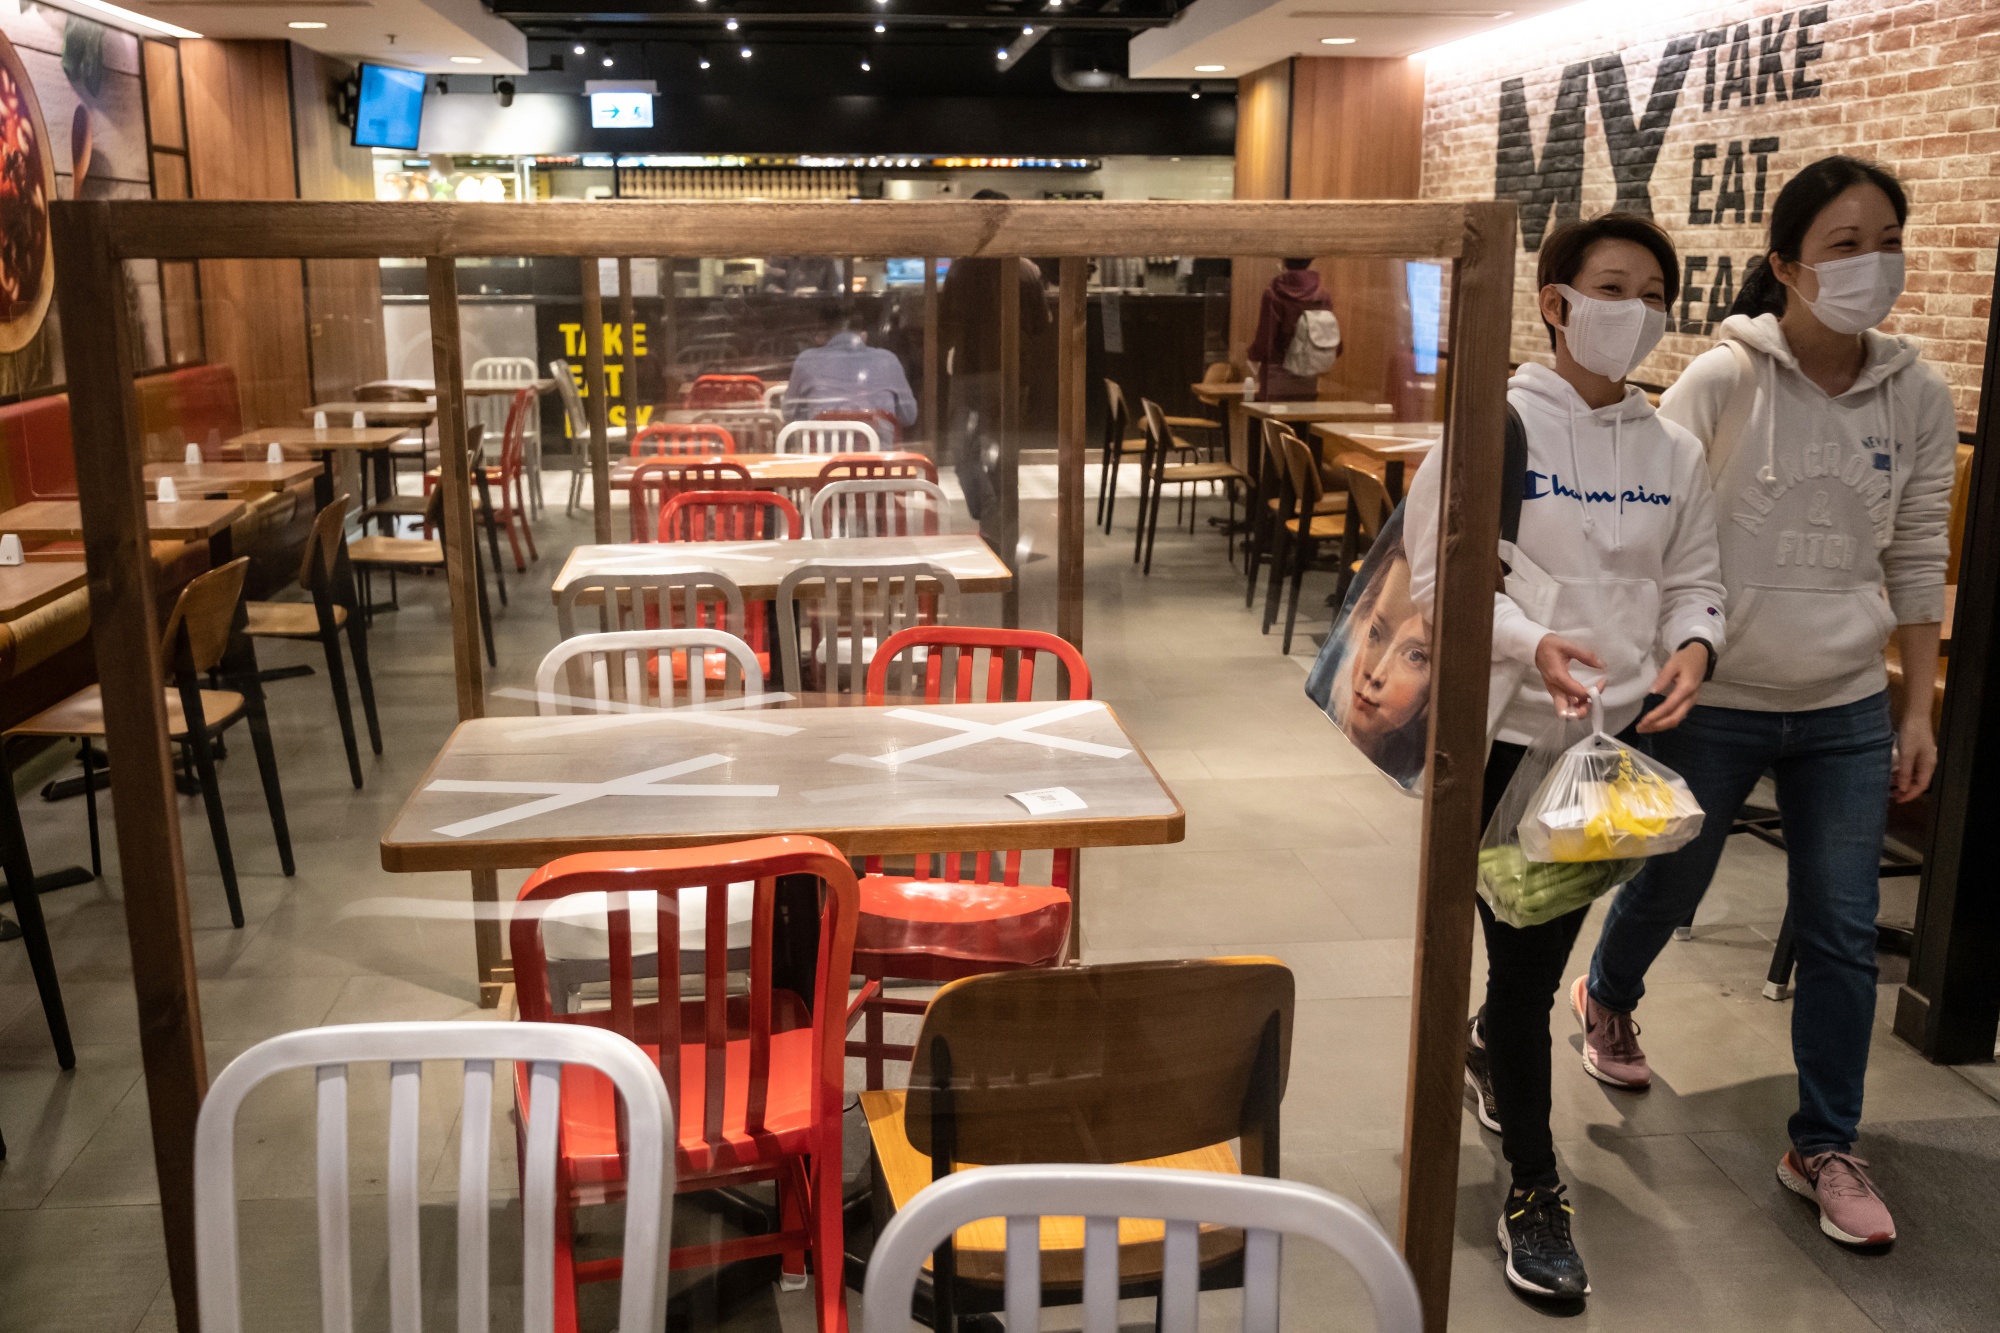 Hong Kong's Food & Beverage Industry As City Returns to Tightest Virus Restrictions